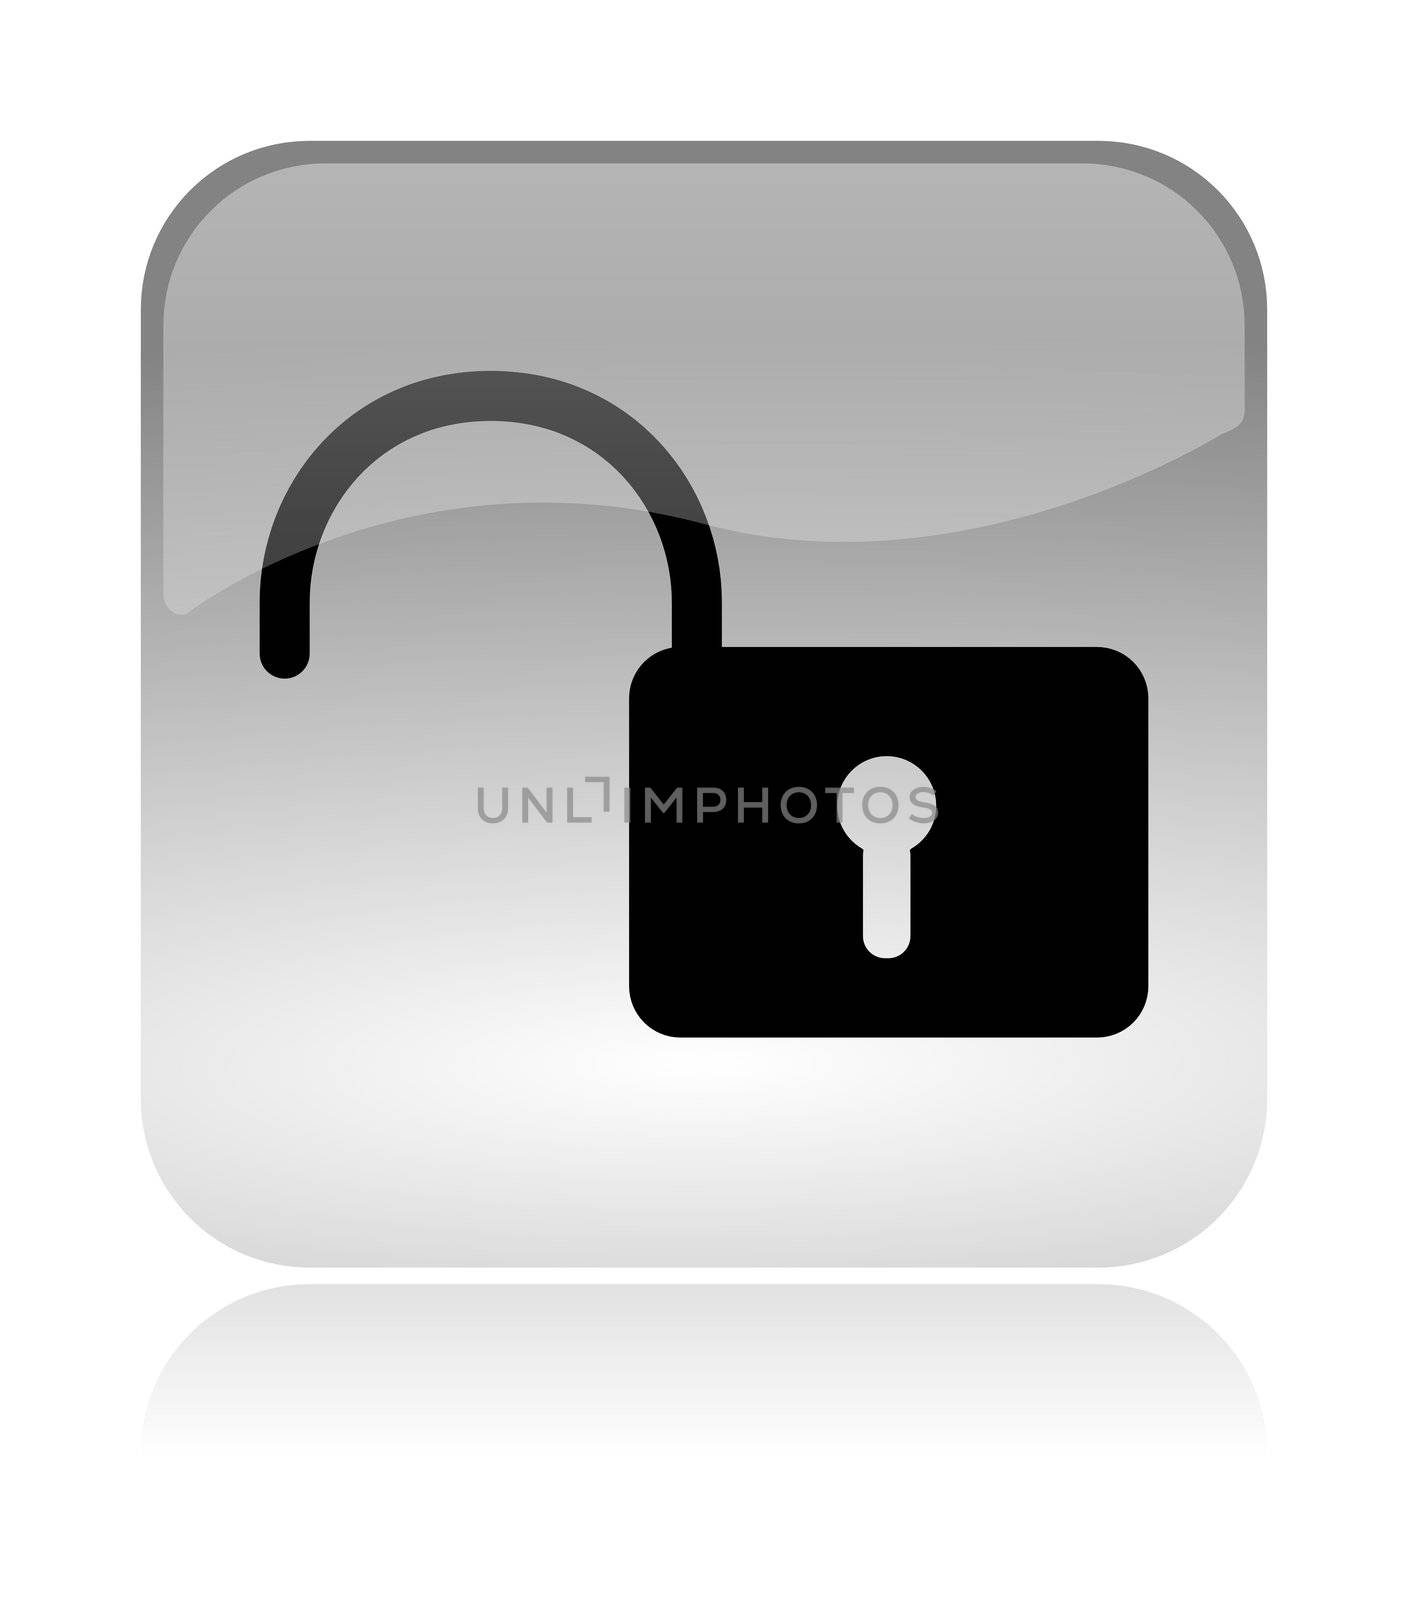 Unlock security padlock white, transparent and glossy web interface icon with reflection